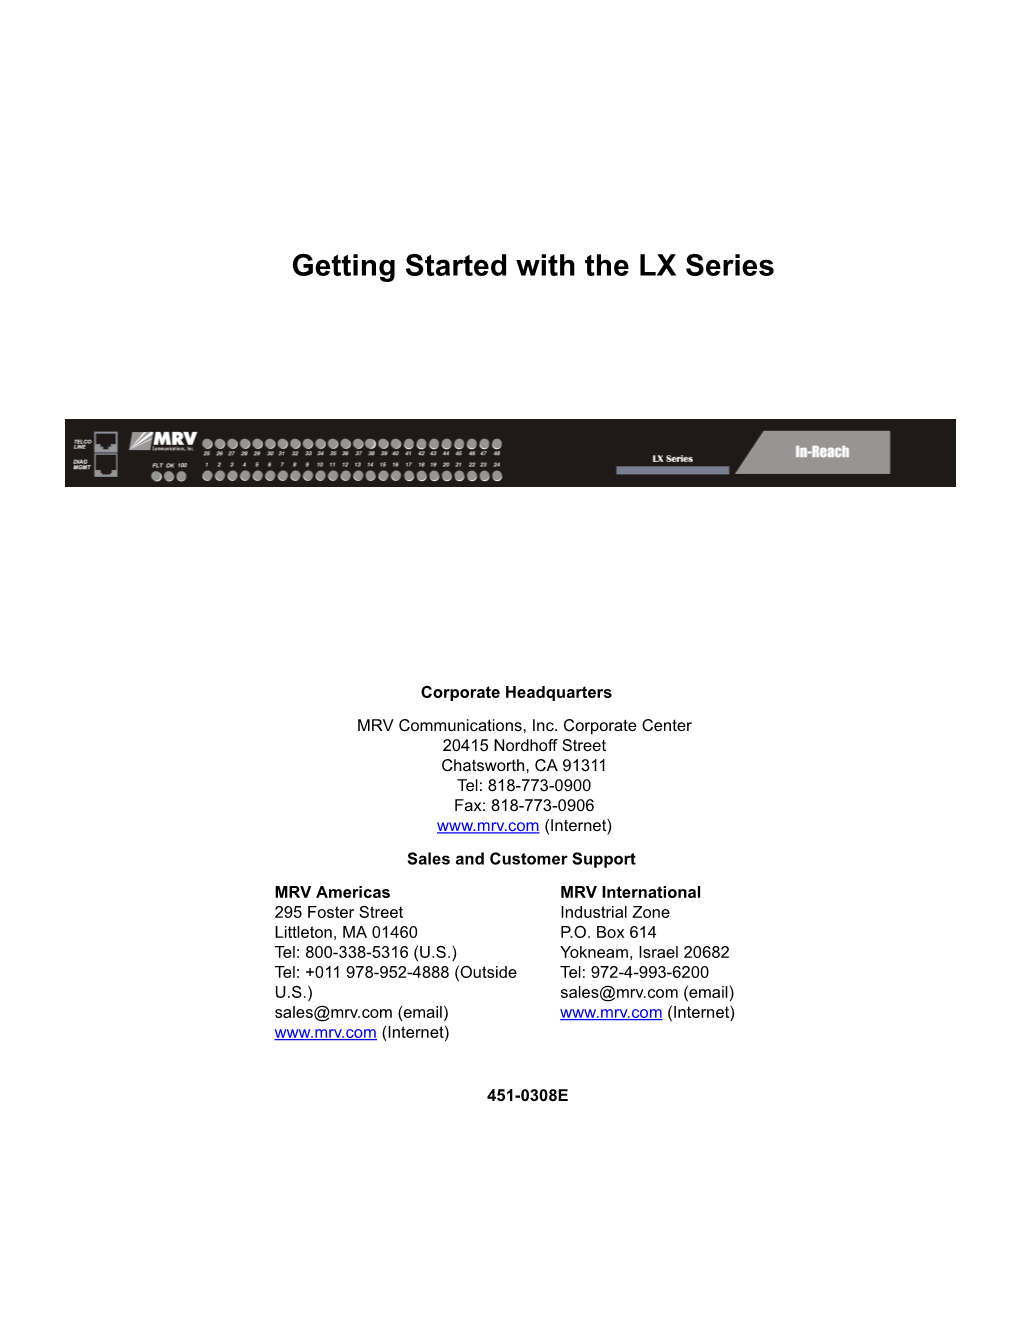 Getting Started with the MRV LX Series Terminal Server